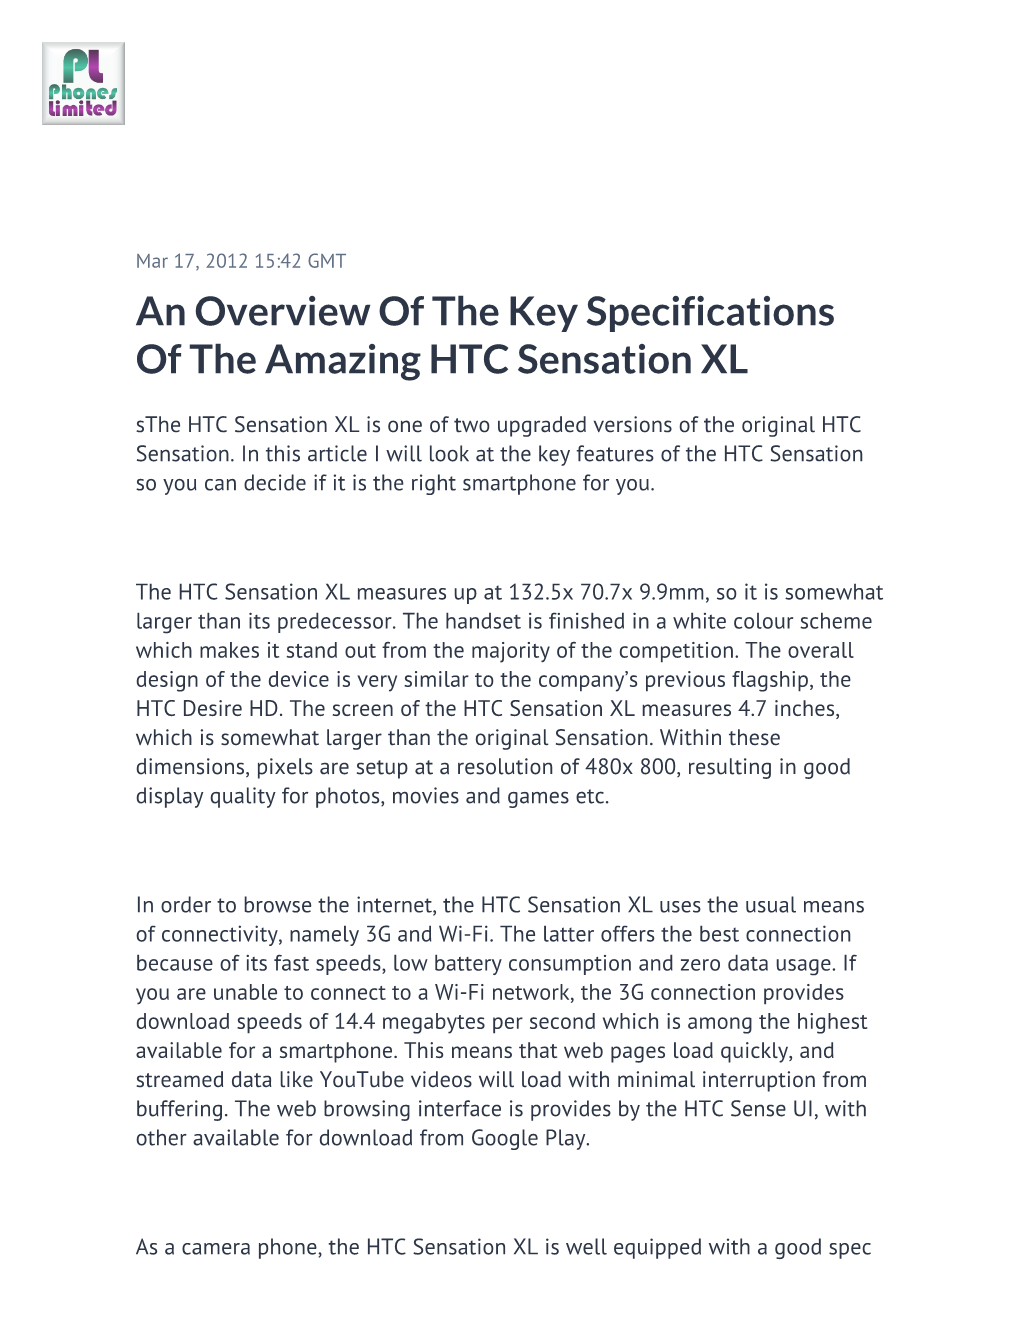 An Overview of the Key Specifications of the Amazing HTC Sensation XL Sthe HTC Sensation XL Is One of Two Upgraded Versions of the Original HTC Sensation